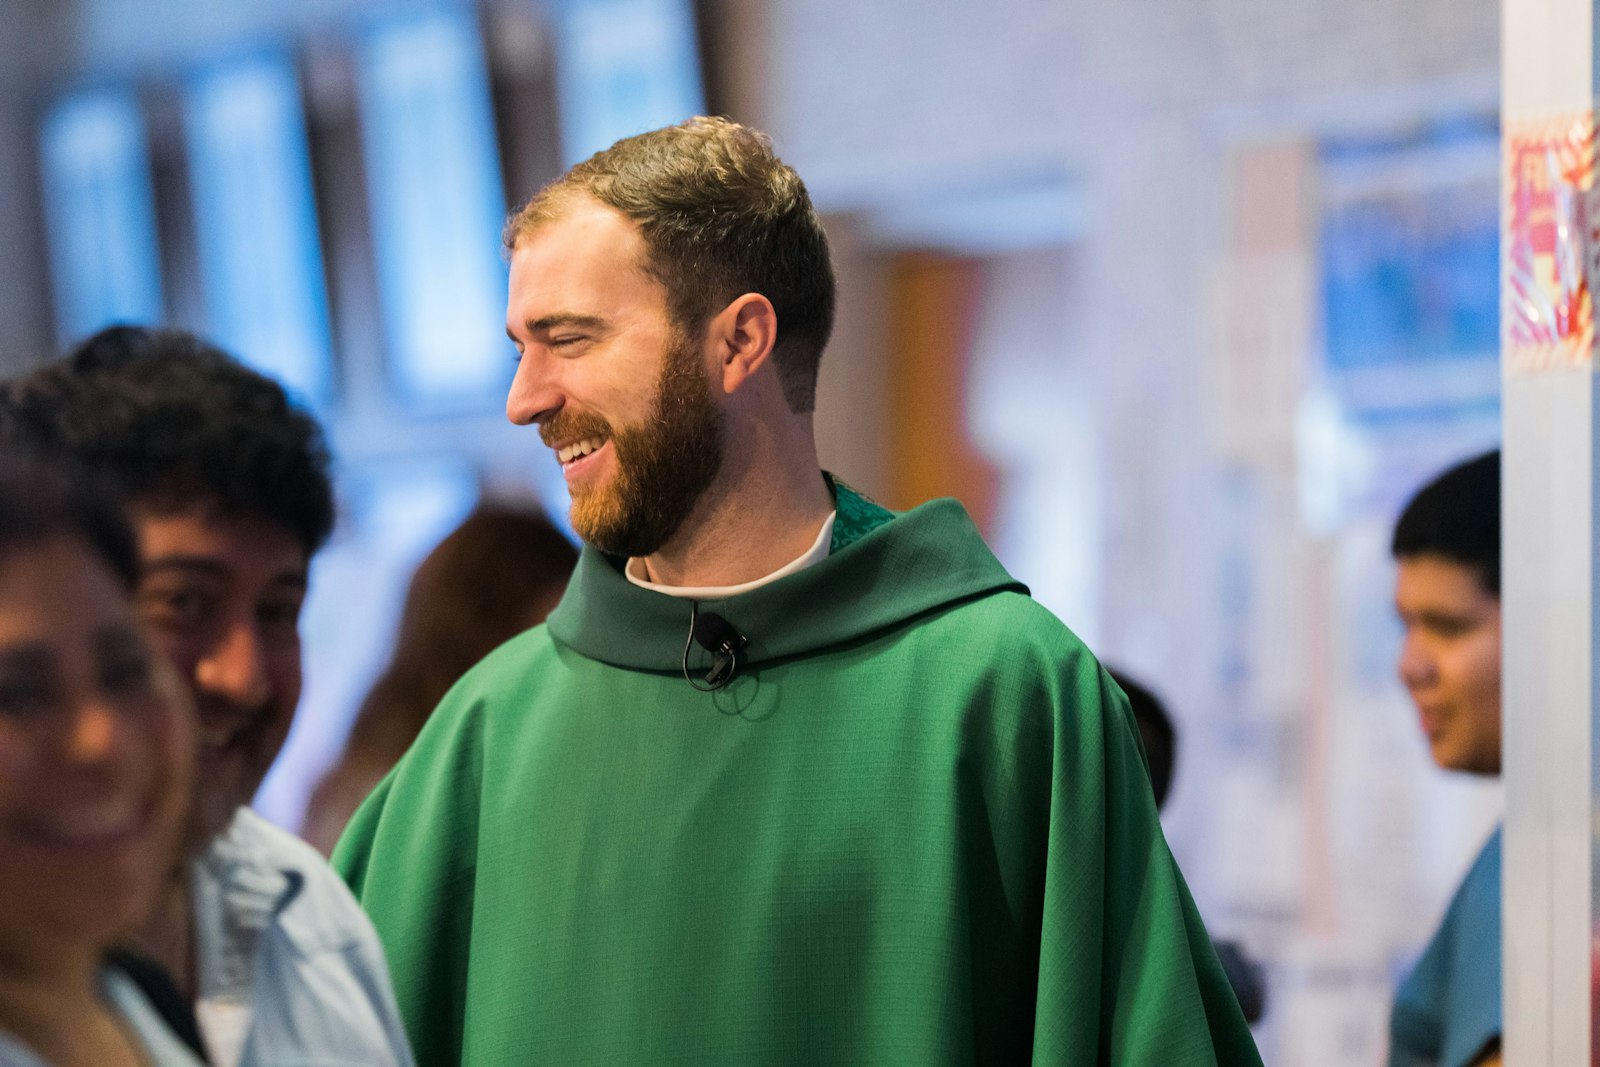 Fr. Grayson Heenan, who today serves at St. Andrew Parish in Rochester, was a seminarian studying at the Pontifical North American College in Rome in 2015 during the filming for "The Holy Game," a documentary about the Vatican's Clericus Cup soccer tournament. (Detroit Catholic file photo)